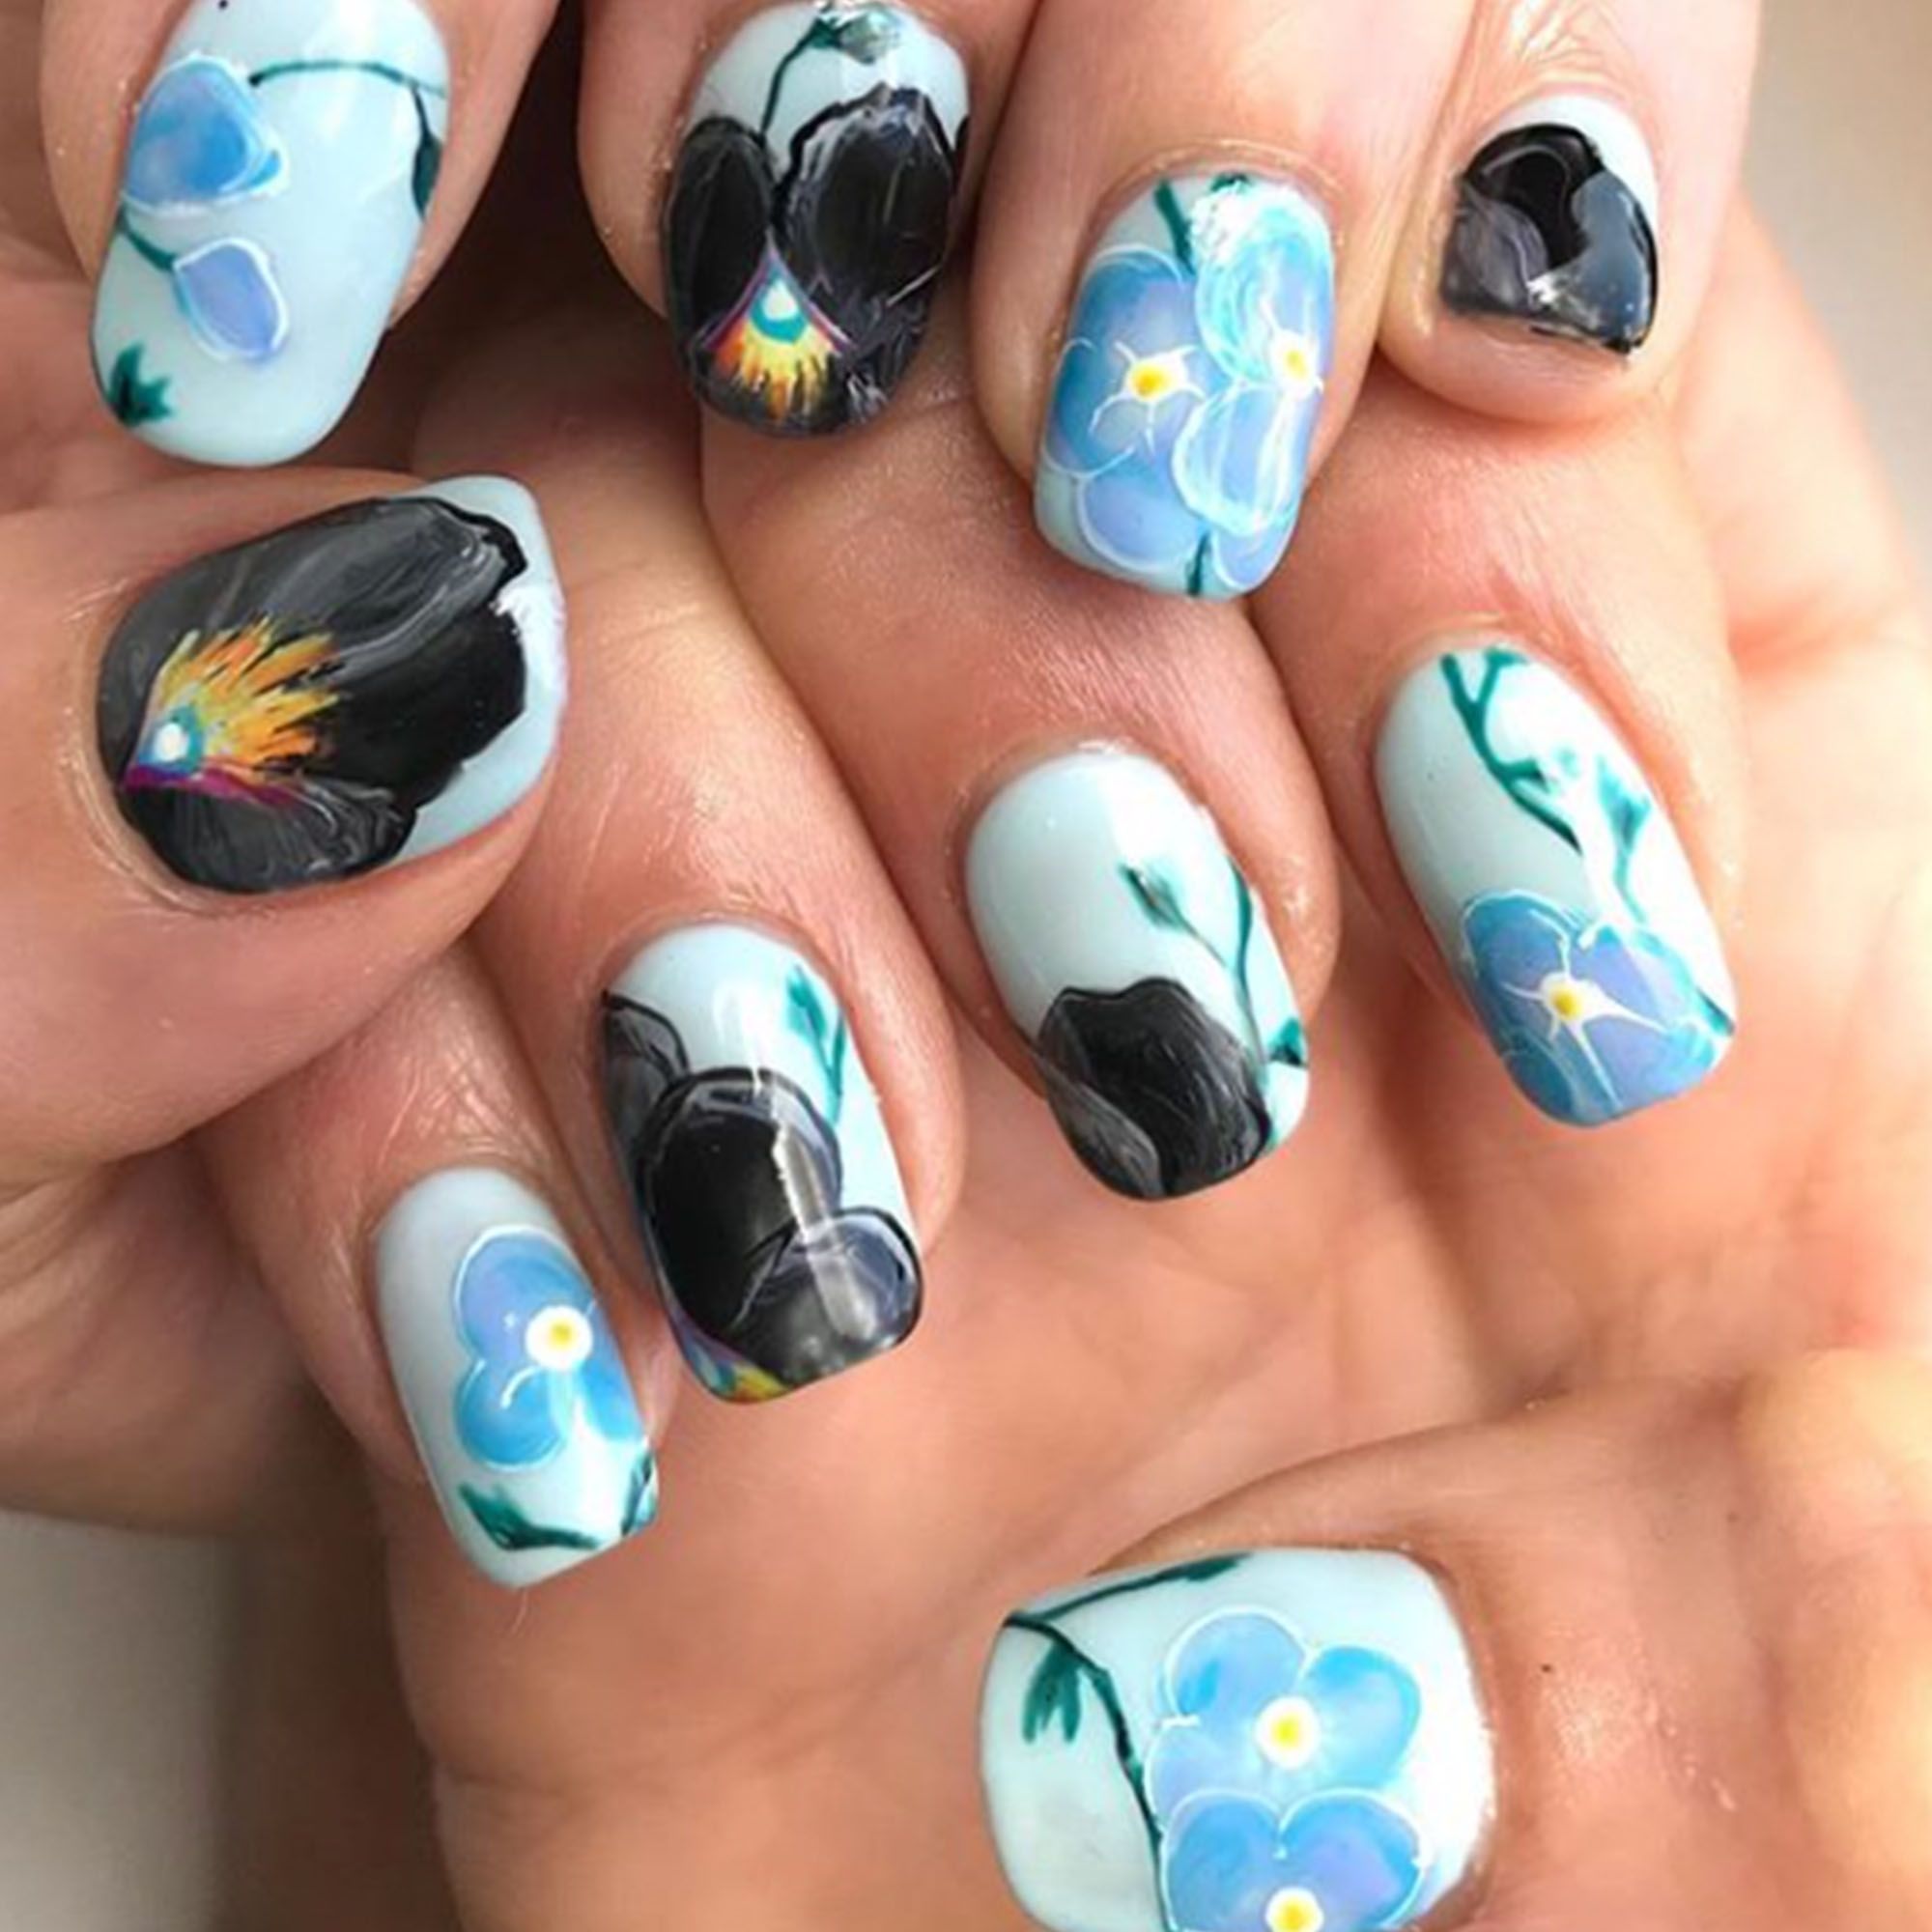 Summer nail art ideas to rock in 2021 : Flower Tip Nails